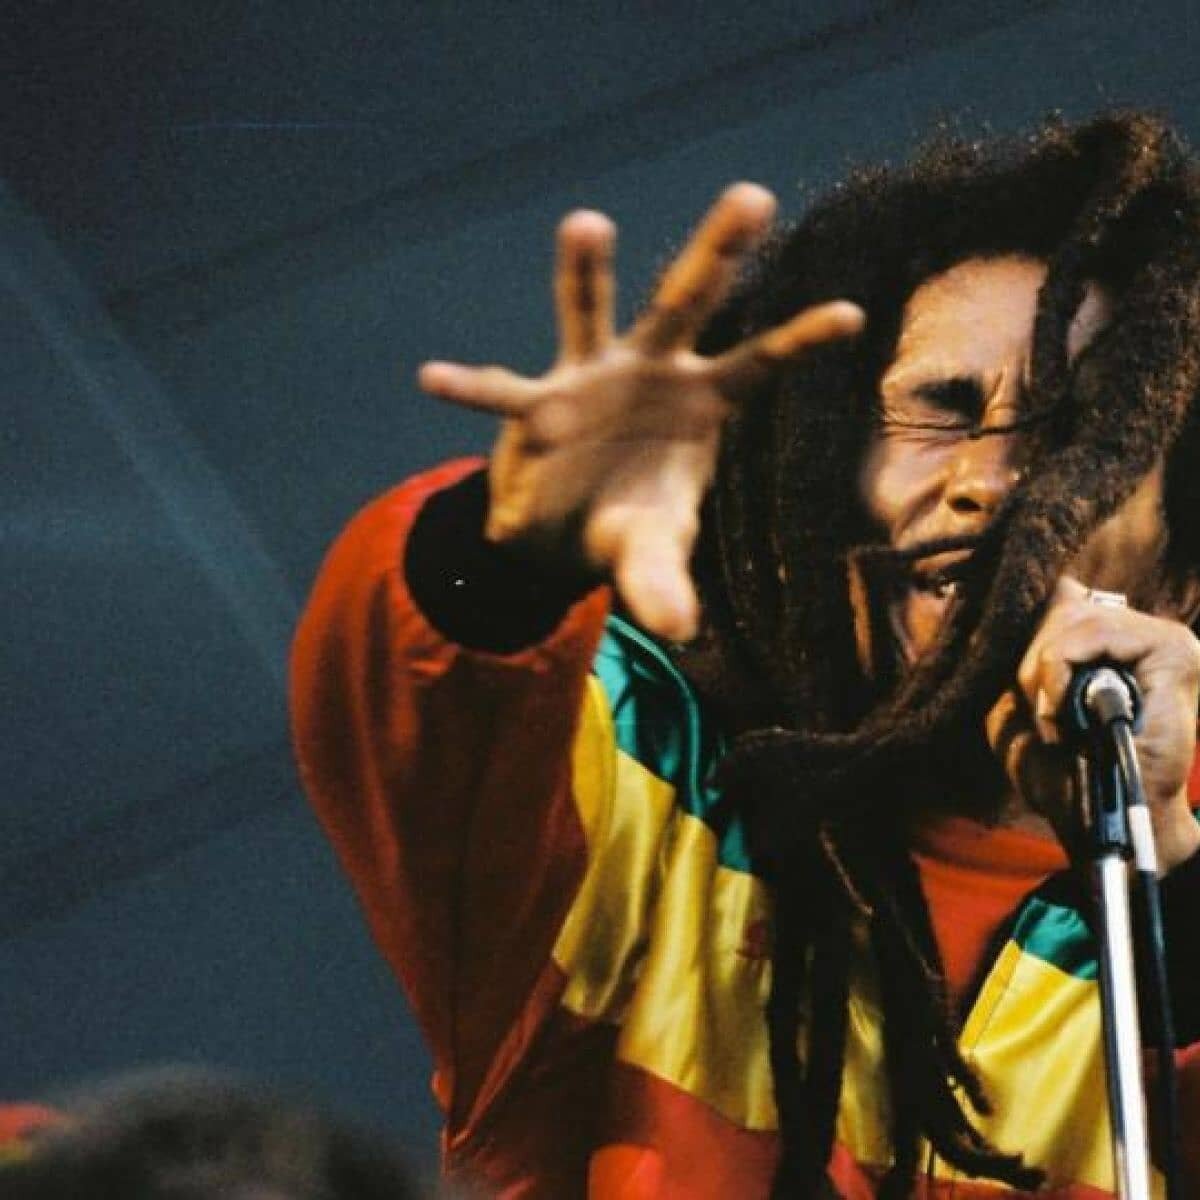 Happy 76th Birthday Robert Nesta Marley!  @bobmarley
On this day we give thanks for the Irie music and message you have left us...
May Jah be with you!
.
.
.
#earthstrong #kingofreggae👑 #peaceandlove✌️💖🌎 #bobmarley #marley #bhm #jamician #oldschoo